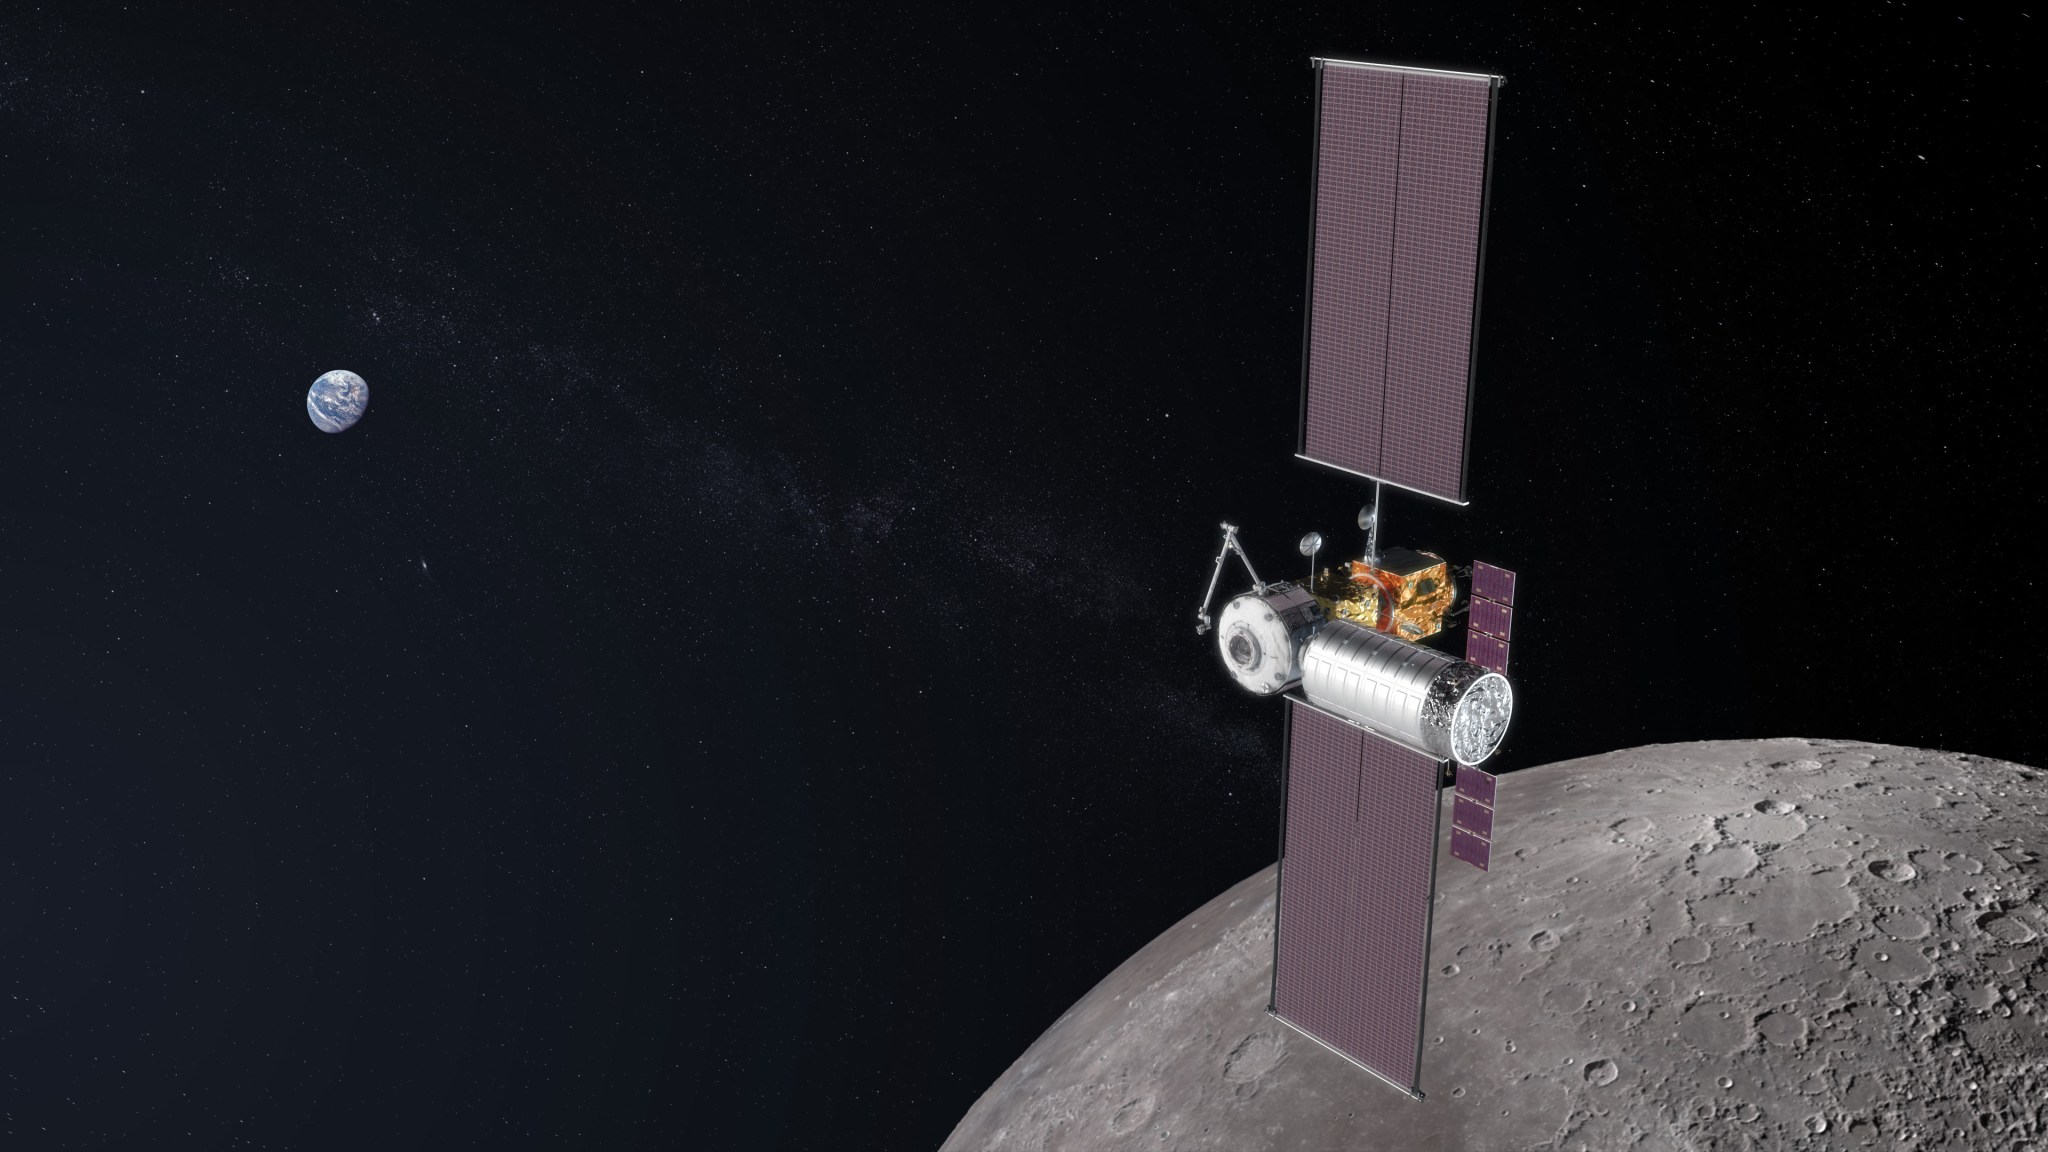 Gateway shown in mid-assembly over the Moon with Earth small in the distant background